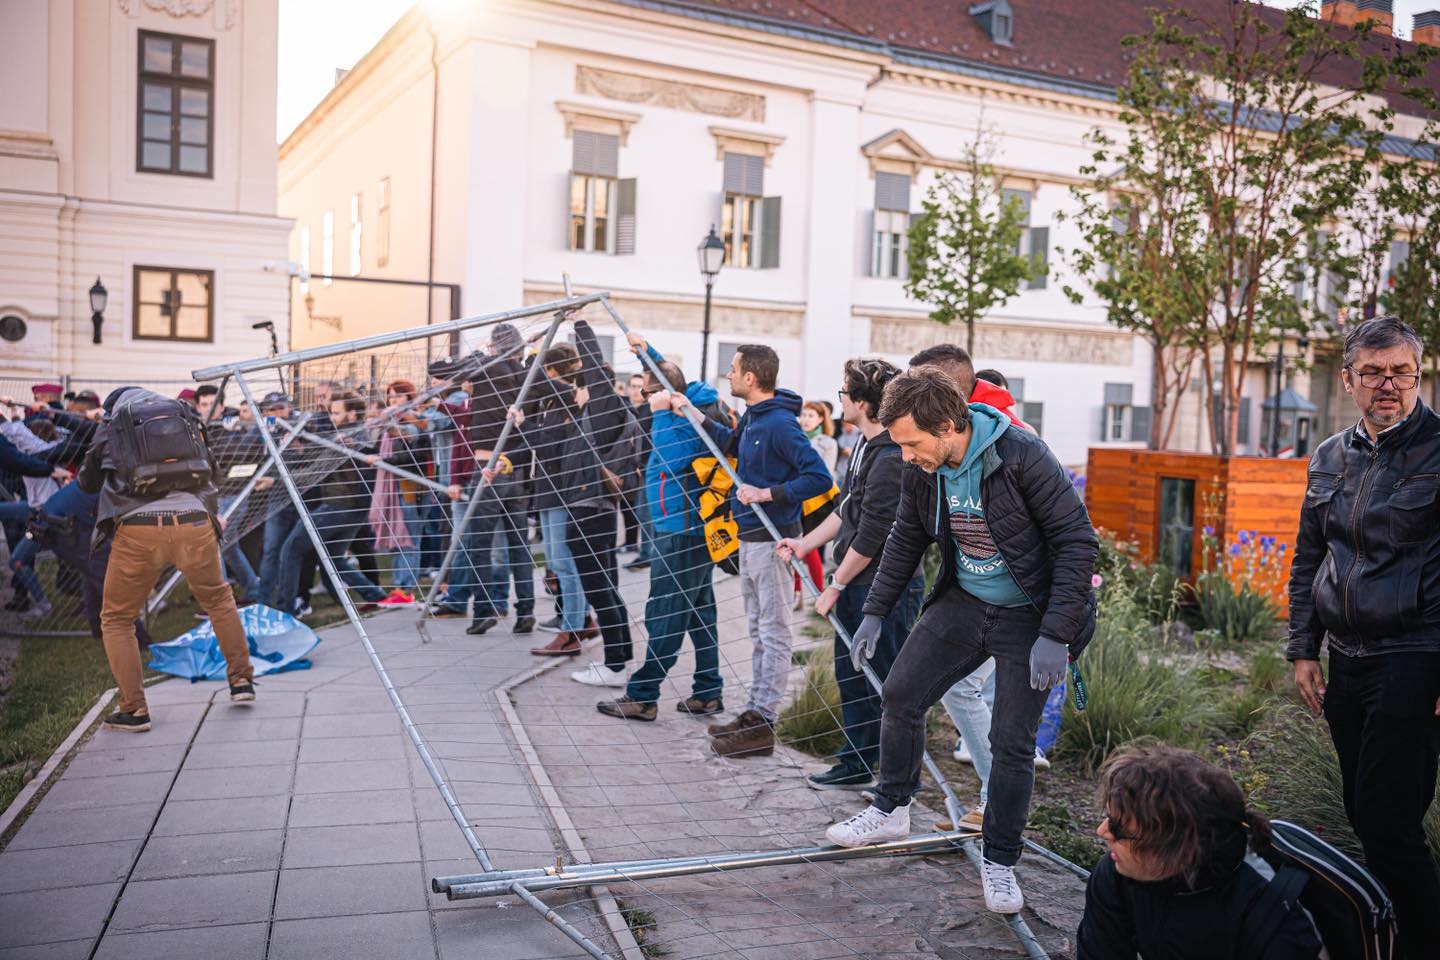 Watch: Momentum Party Removes Fence Outside Orbán's Office, Again